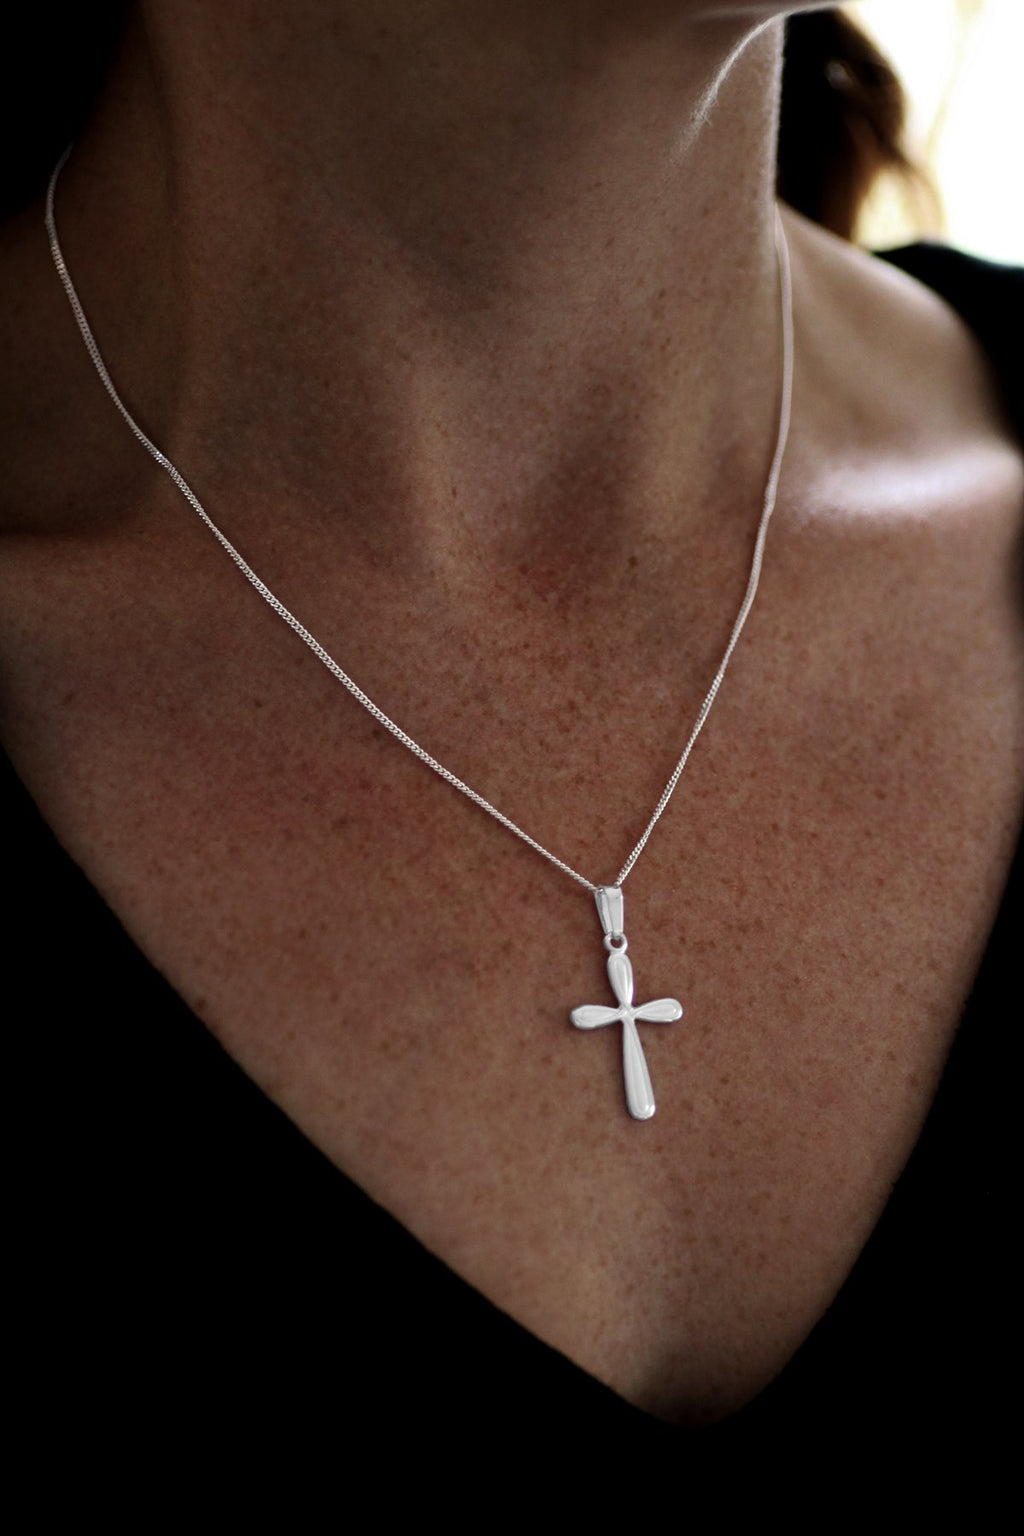 Silver Rounded Cross Pendant